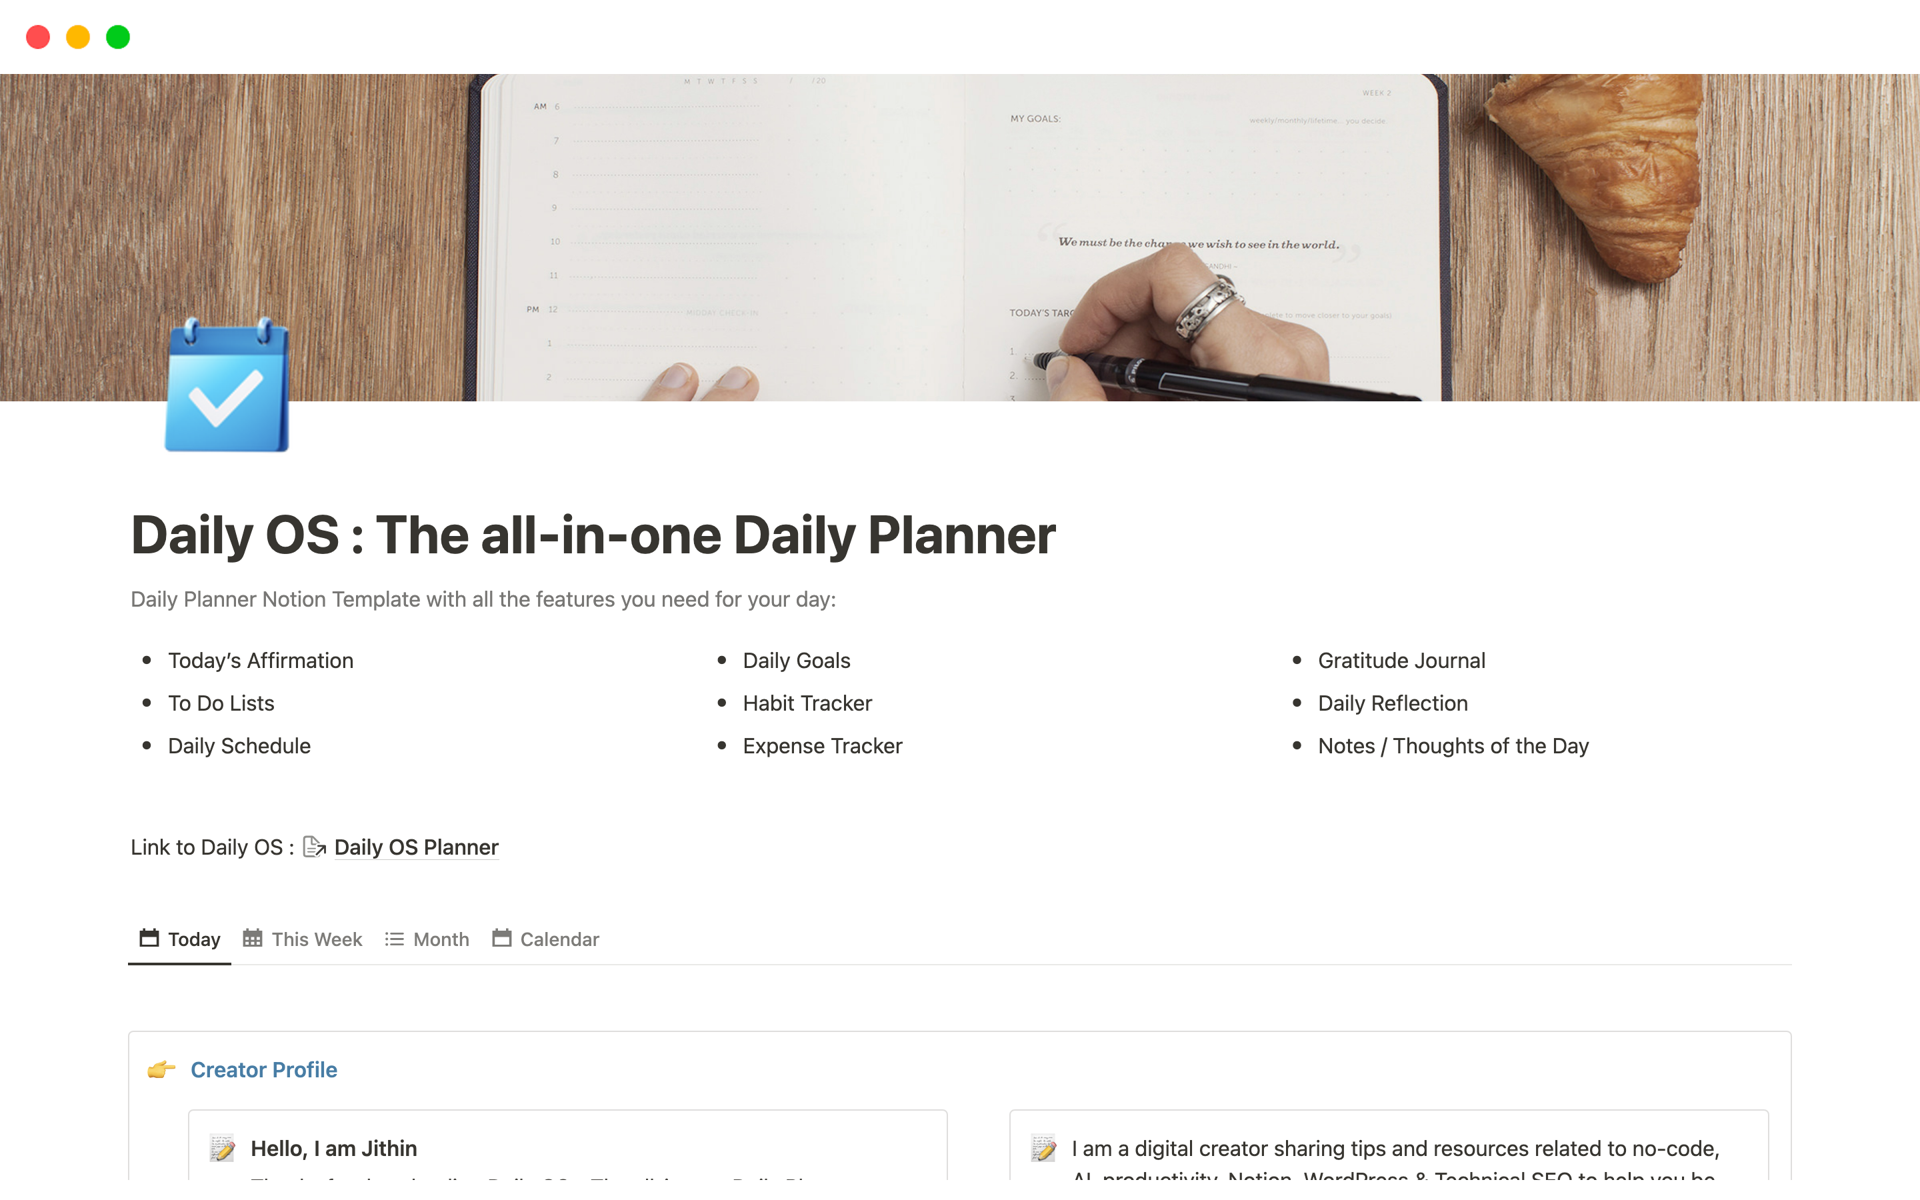 Daily OS Daily Planner is an All-In-One Daily Planner Notion Template designed to help you stay organized, boost productivity, and cultivate a balanced life. 